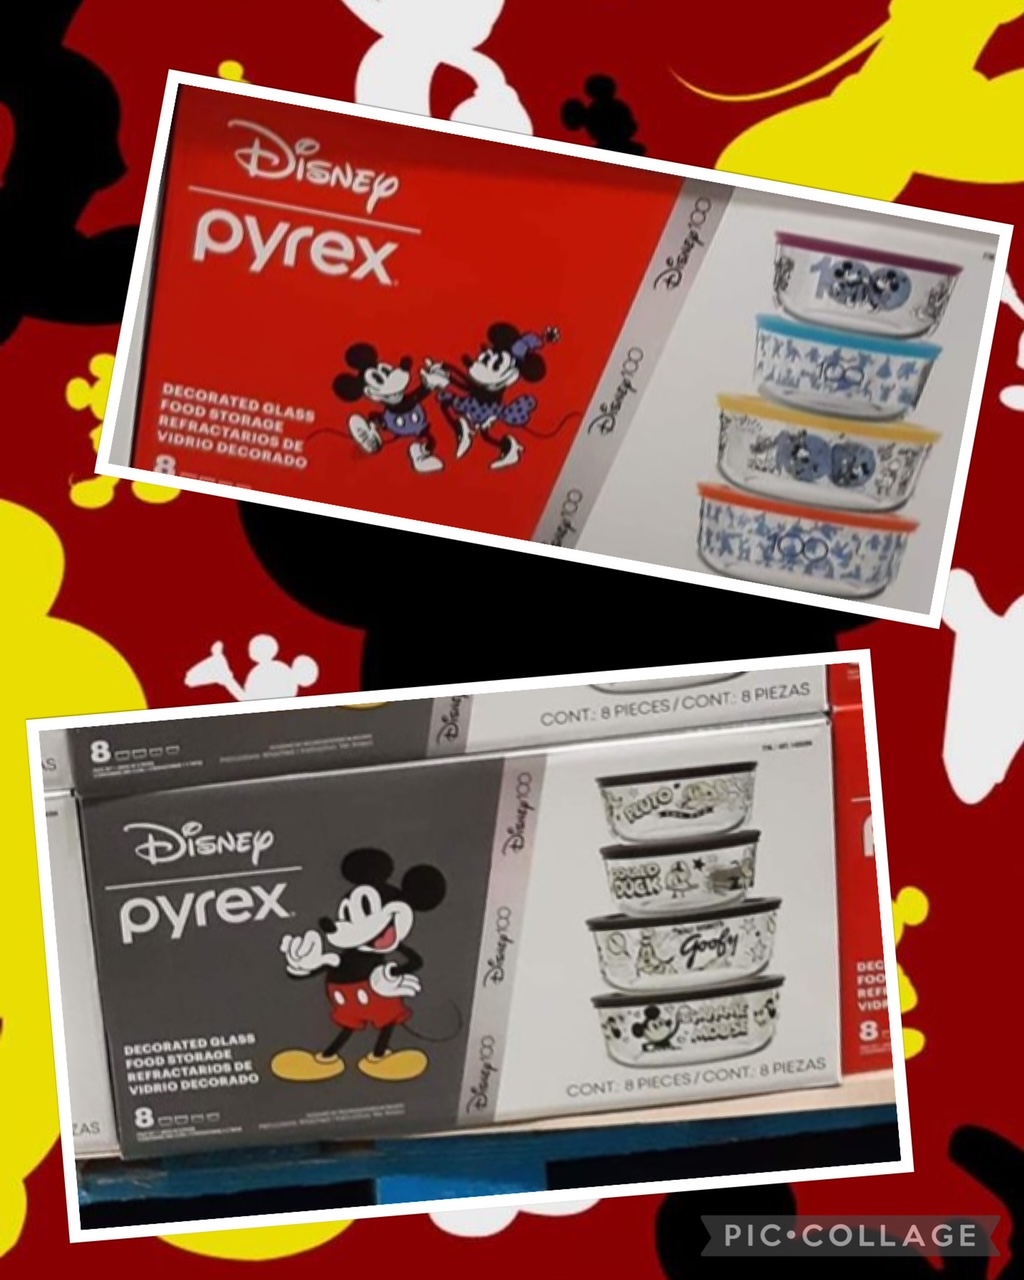 Pyrex Disney 100 Mickey Minnie Mouse 100 Years Set 4 Glass Bowls and Lids